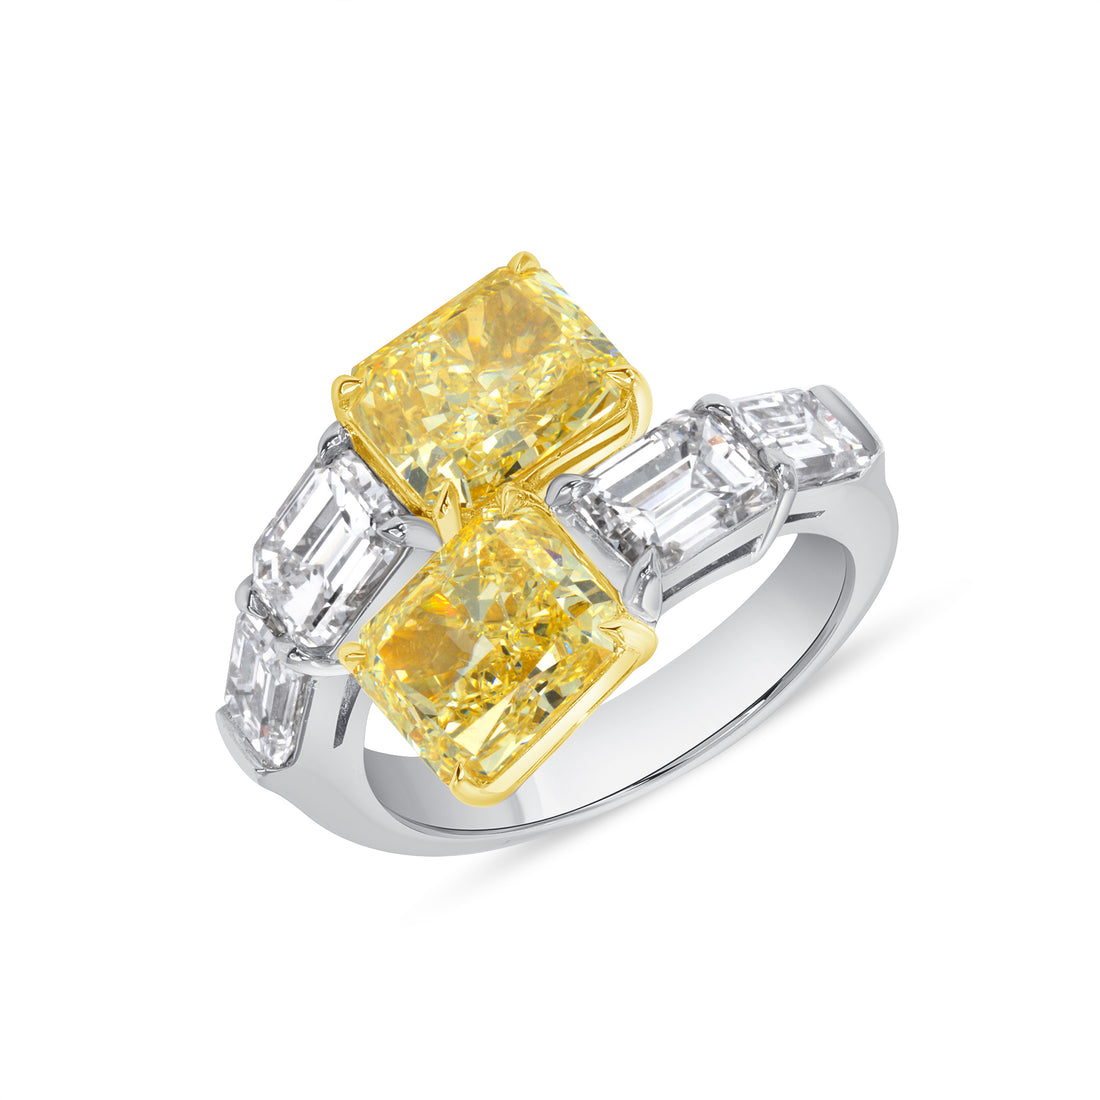 6.51 CT. Radiant Cut YZ Yellow Diamond and Emerald Cut Diamond Bypass Ring in Platinum and 18K Yellow Gold